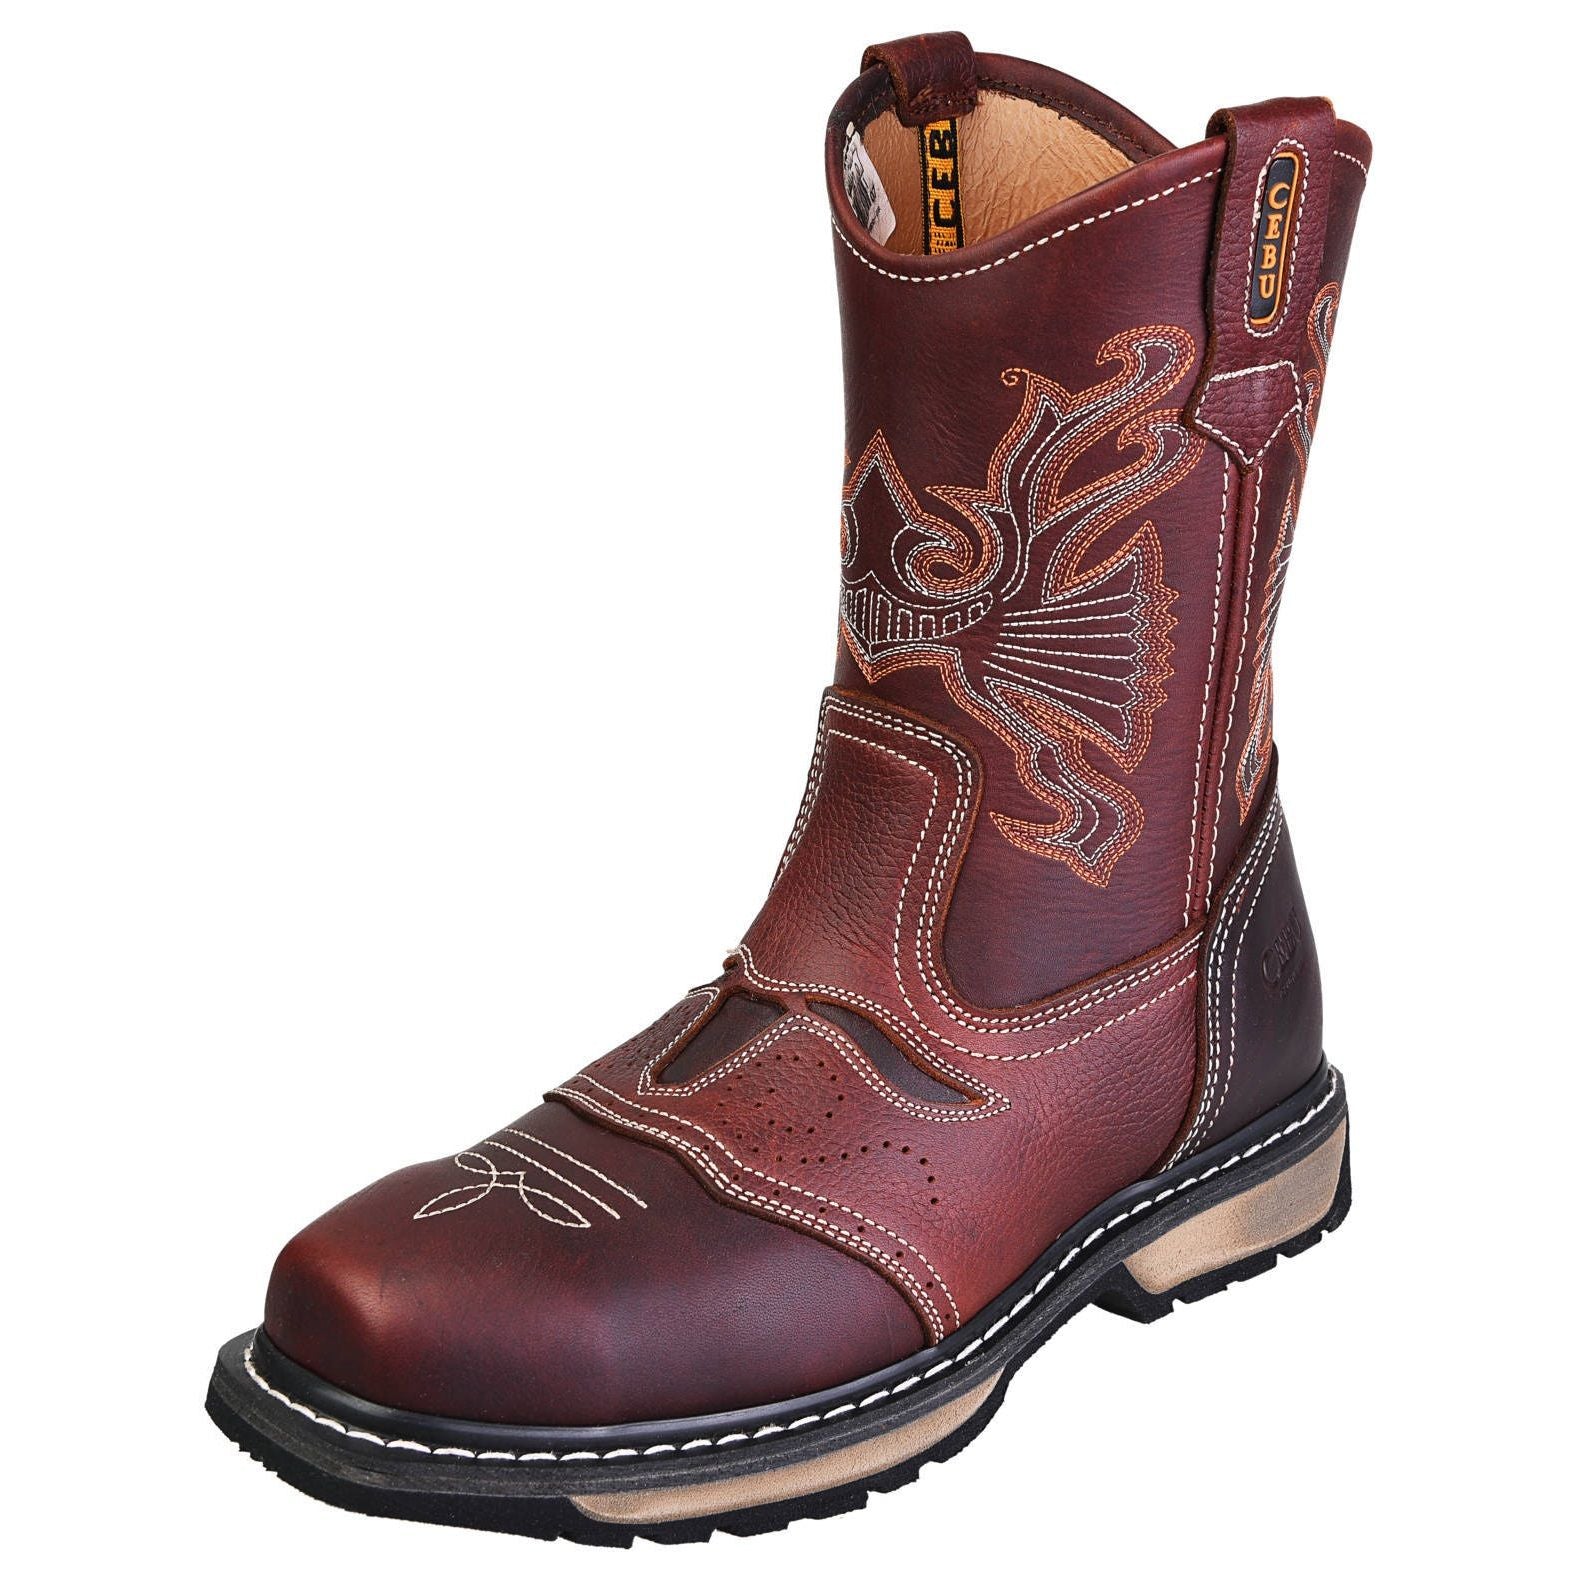 Men's RODEO - Composite Toe 10" Pull On Work Boots